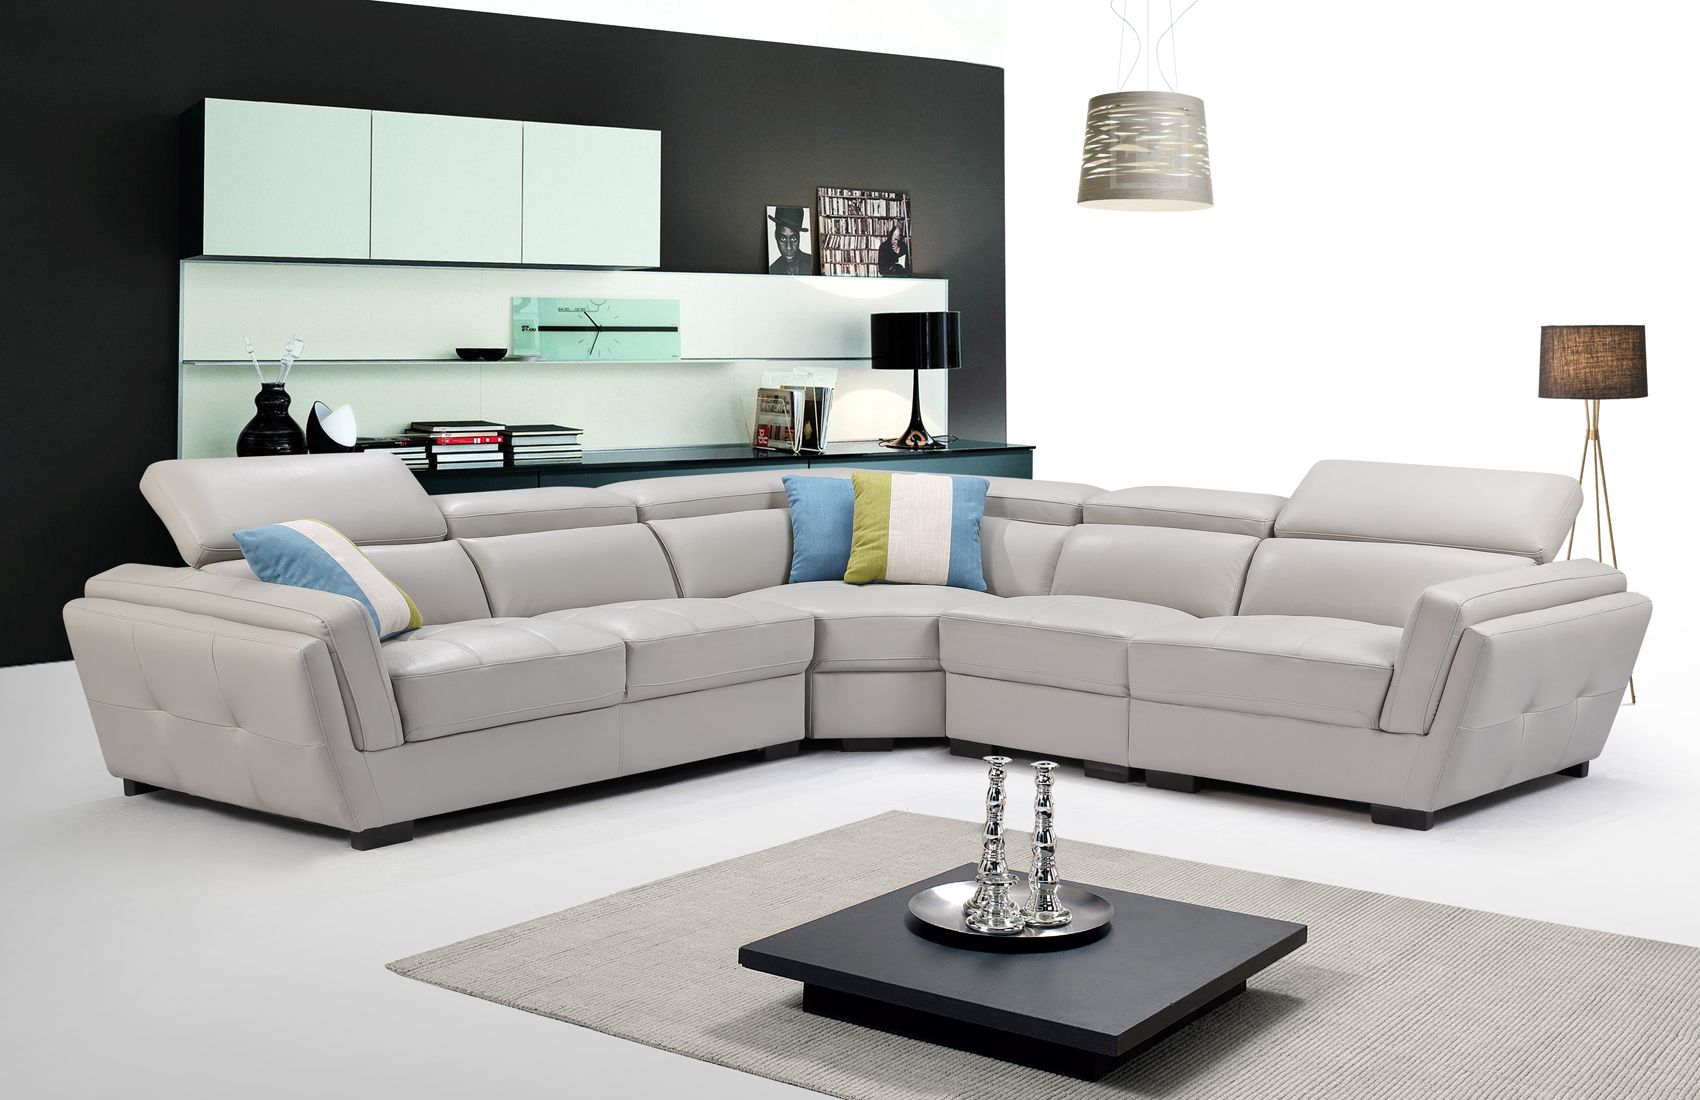 Advanced Adjustable Modern Leather L Shape Sectional With Pillows Pertaining To Modern L Shaped Sofa Sectionals (View 17 of 20)